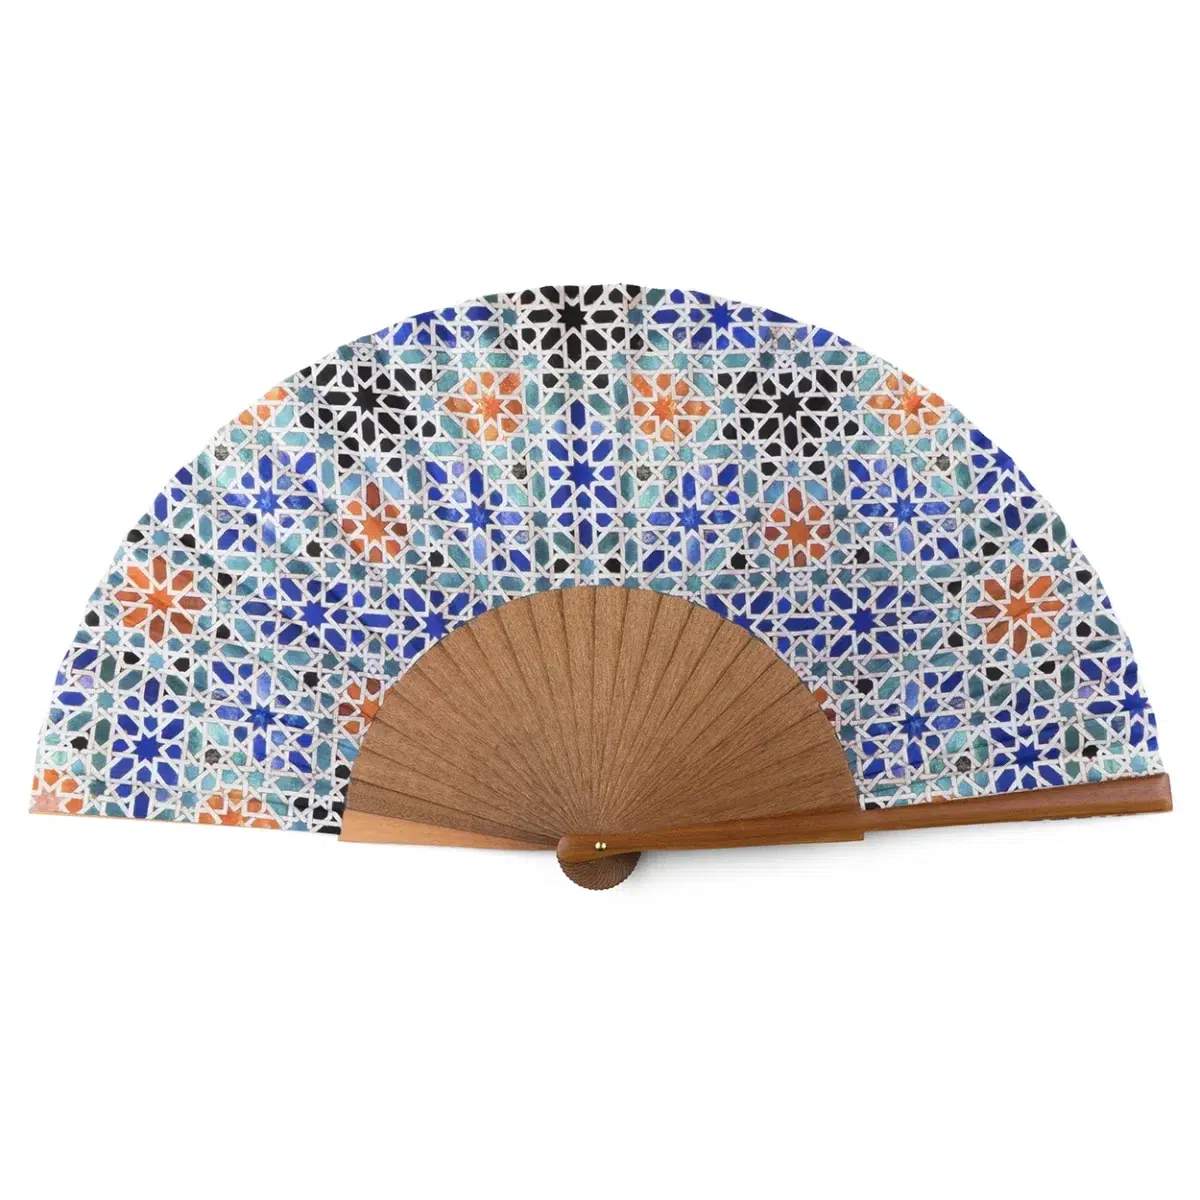 Multicolored Silk Fan with Geometric Print Inspired by Morocco.